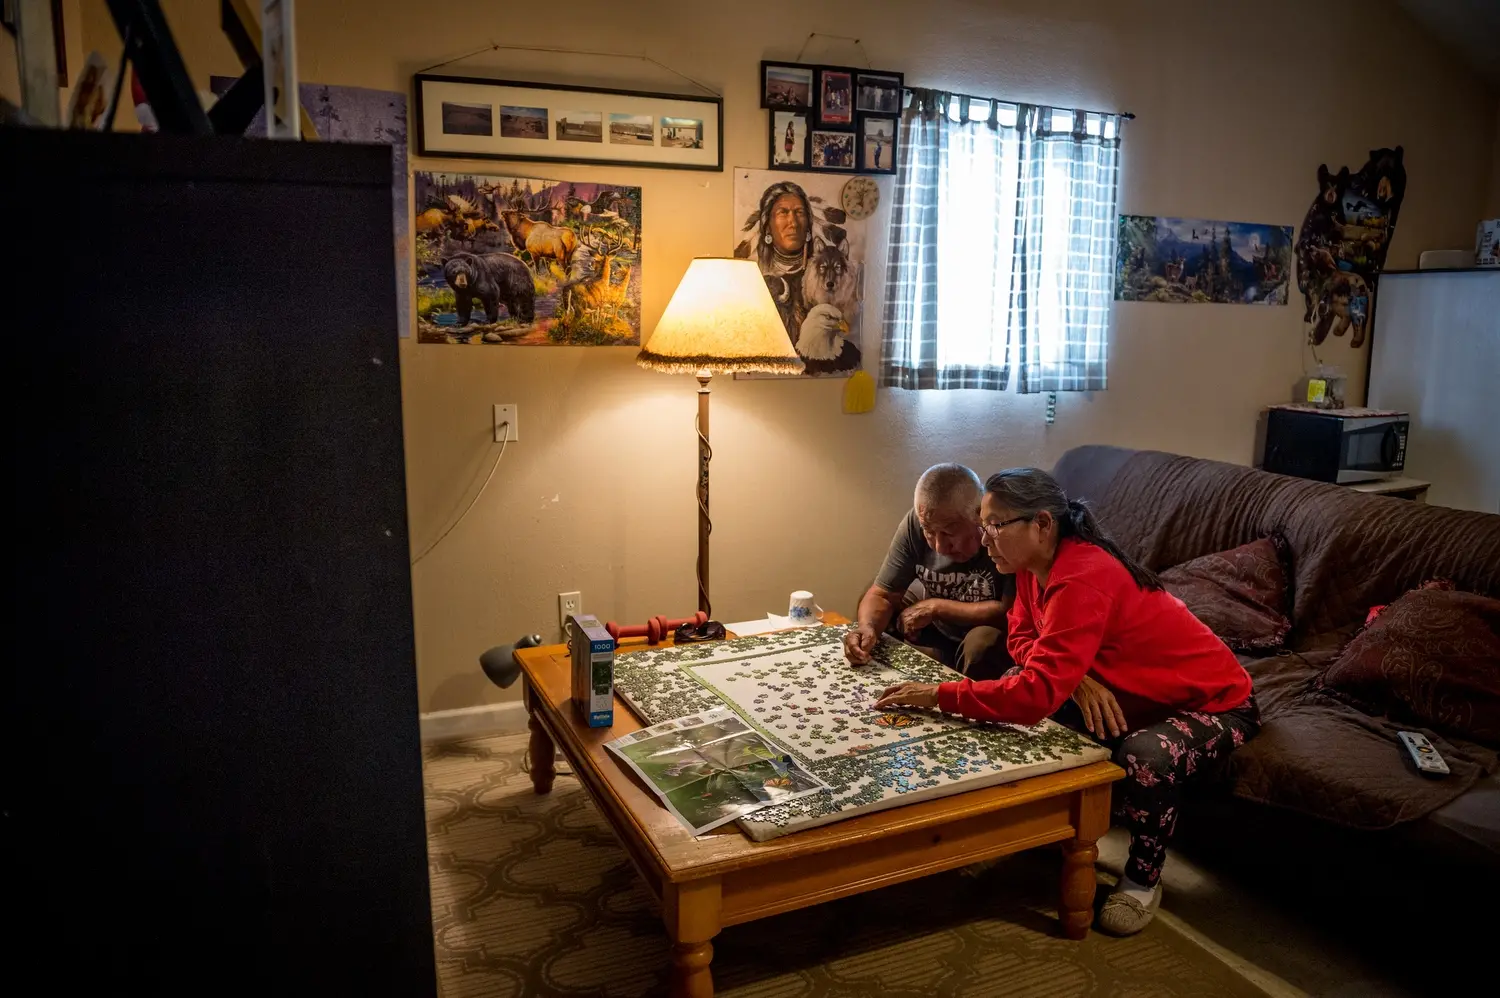 Leona Talker is pictured putting a puzzle together with her father, Tommy Talker. Image by Mary F. Calvert. United States, 2020.